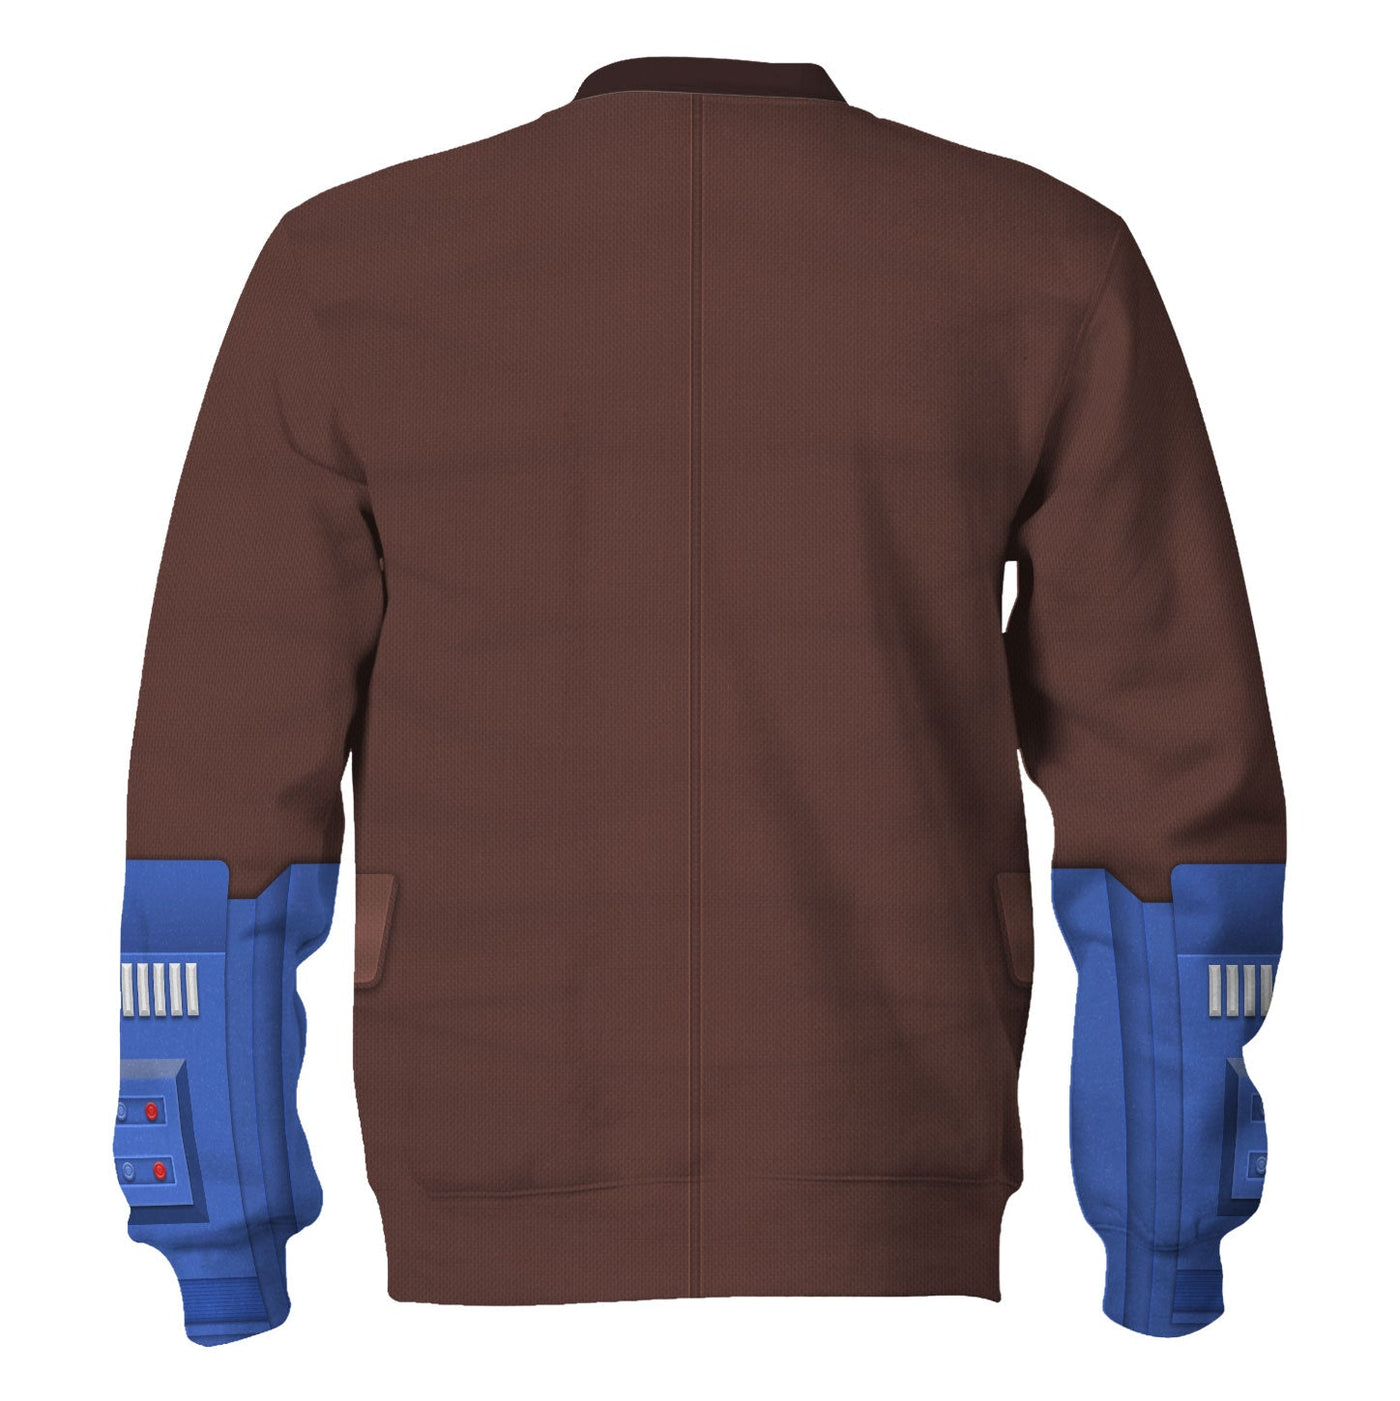 Star Wars Cad Bane's Bounty Hunter Costume - Sweater - Ugly Christmas Sweater